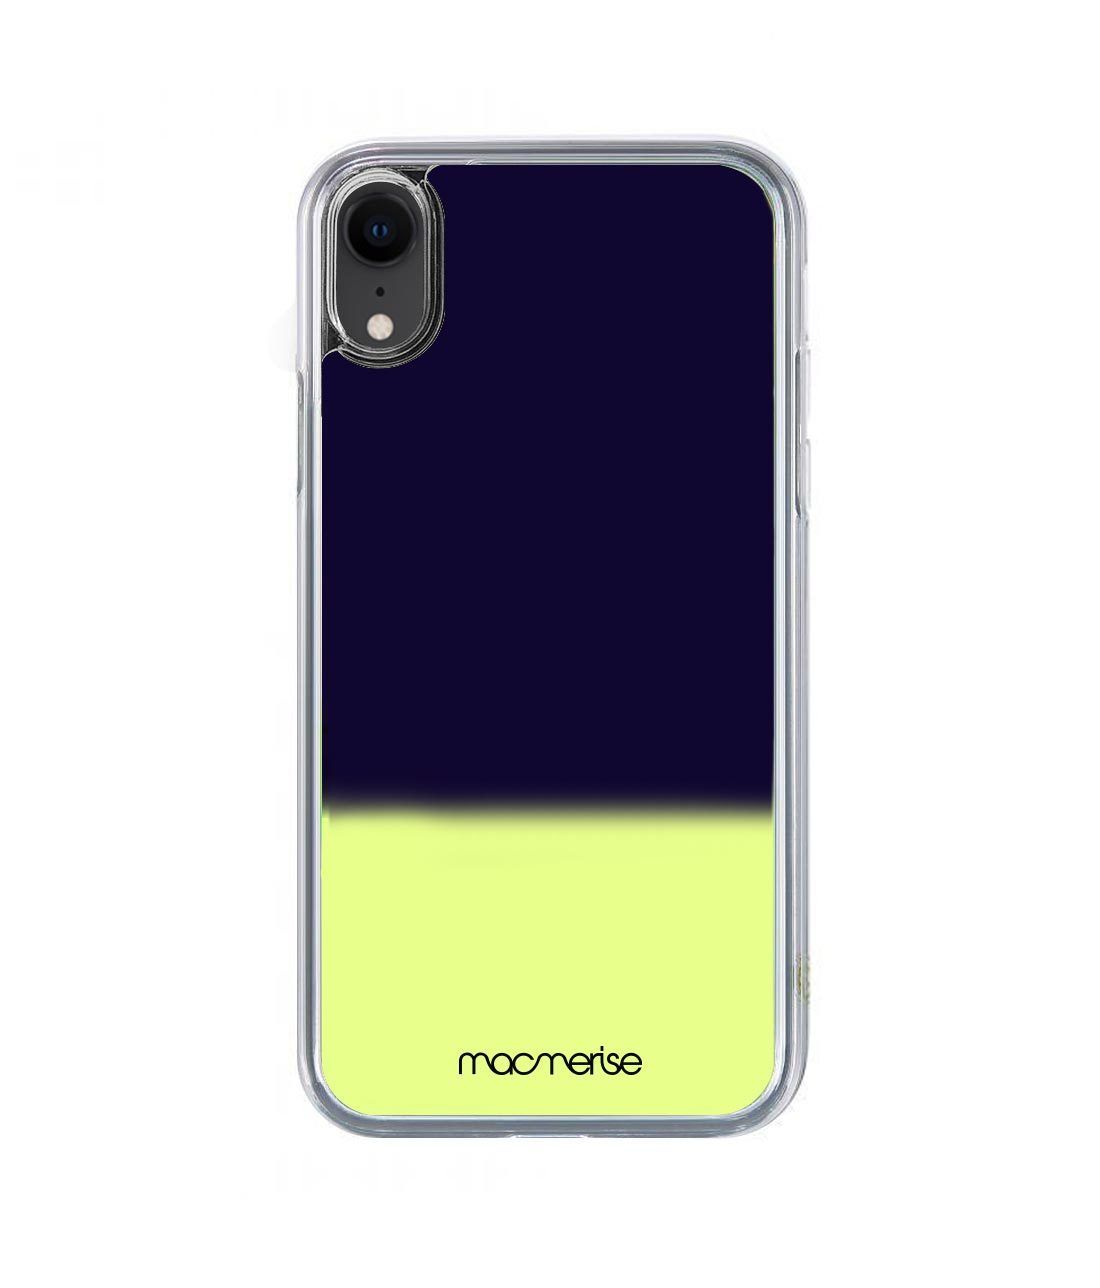 Neon Sand Blue - Neon Sand Phone Case for iPhone XR